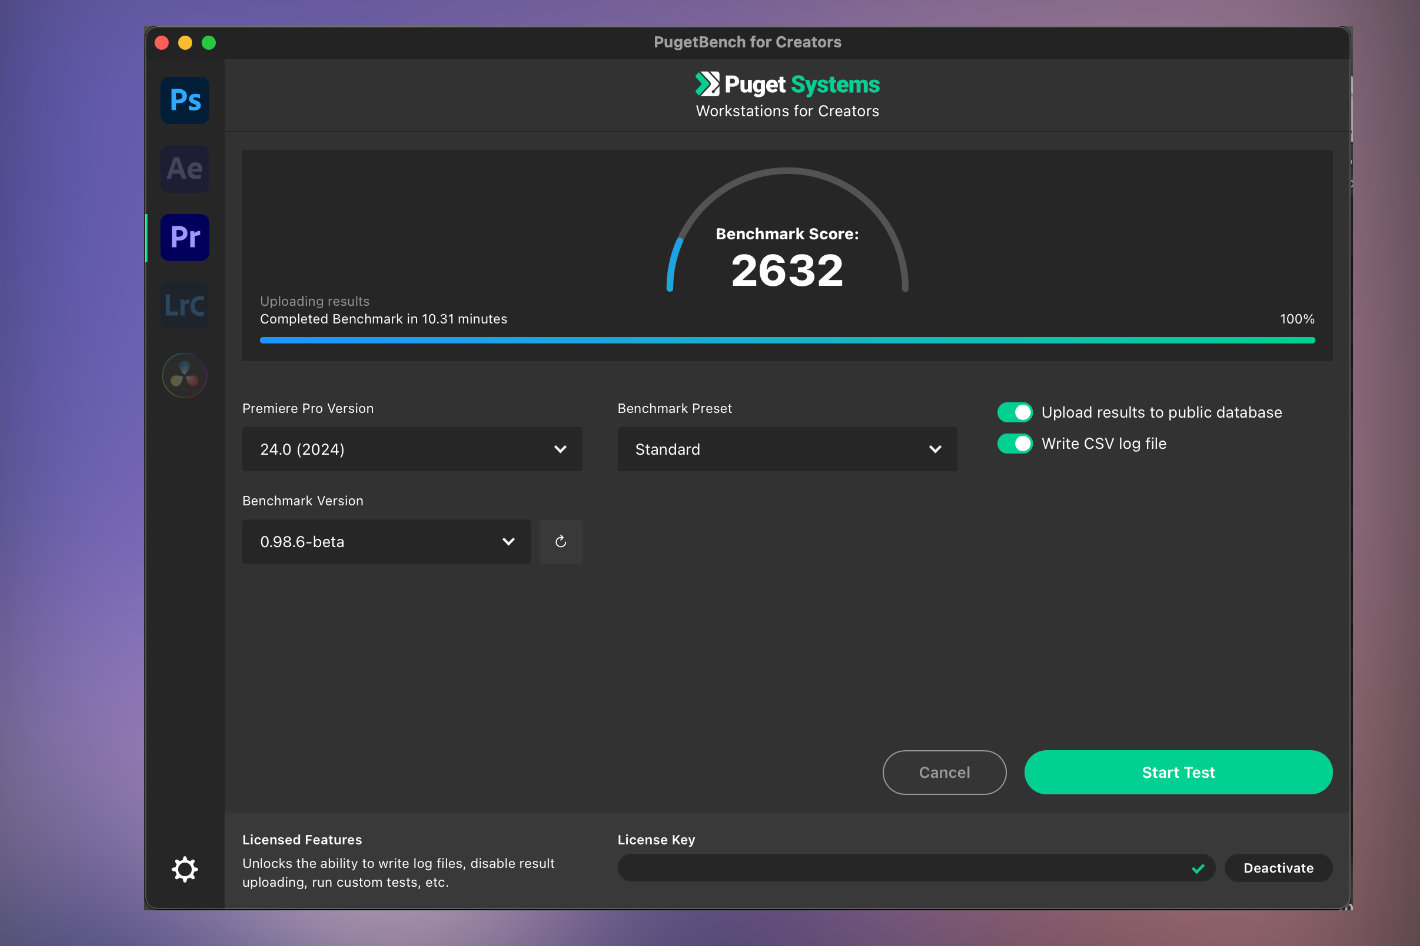 PugetBench for Creators, a new benchmarking app